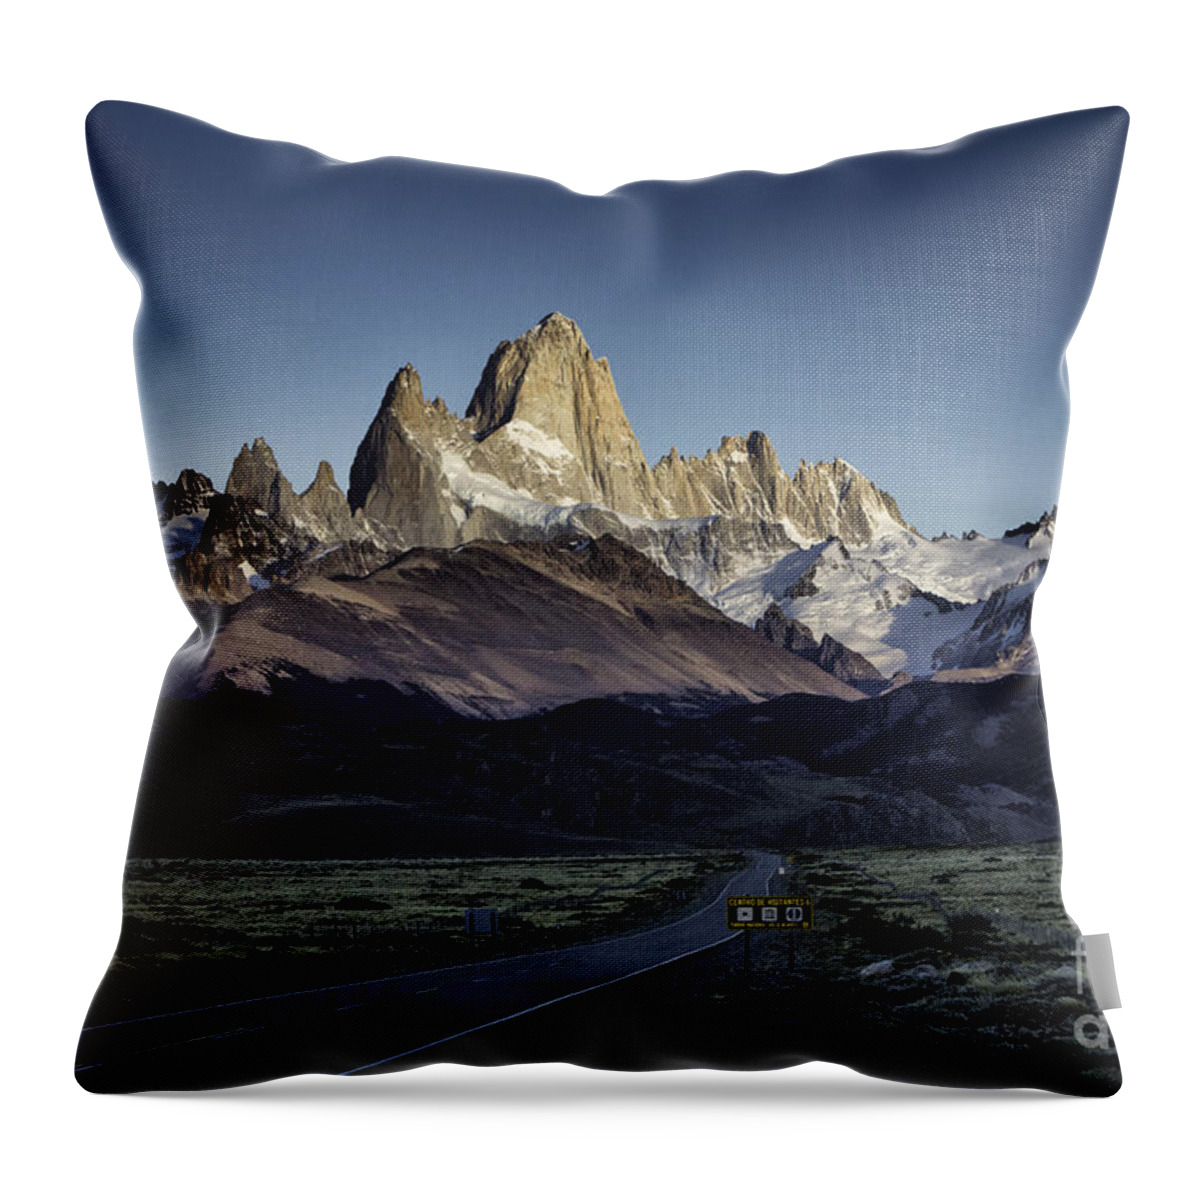 Patagonia Throw Pillow featuring the photograph Mount Fitz Roy 5 by Timothy Hacker